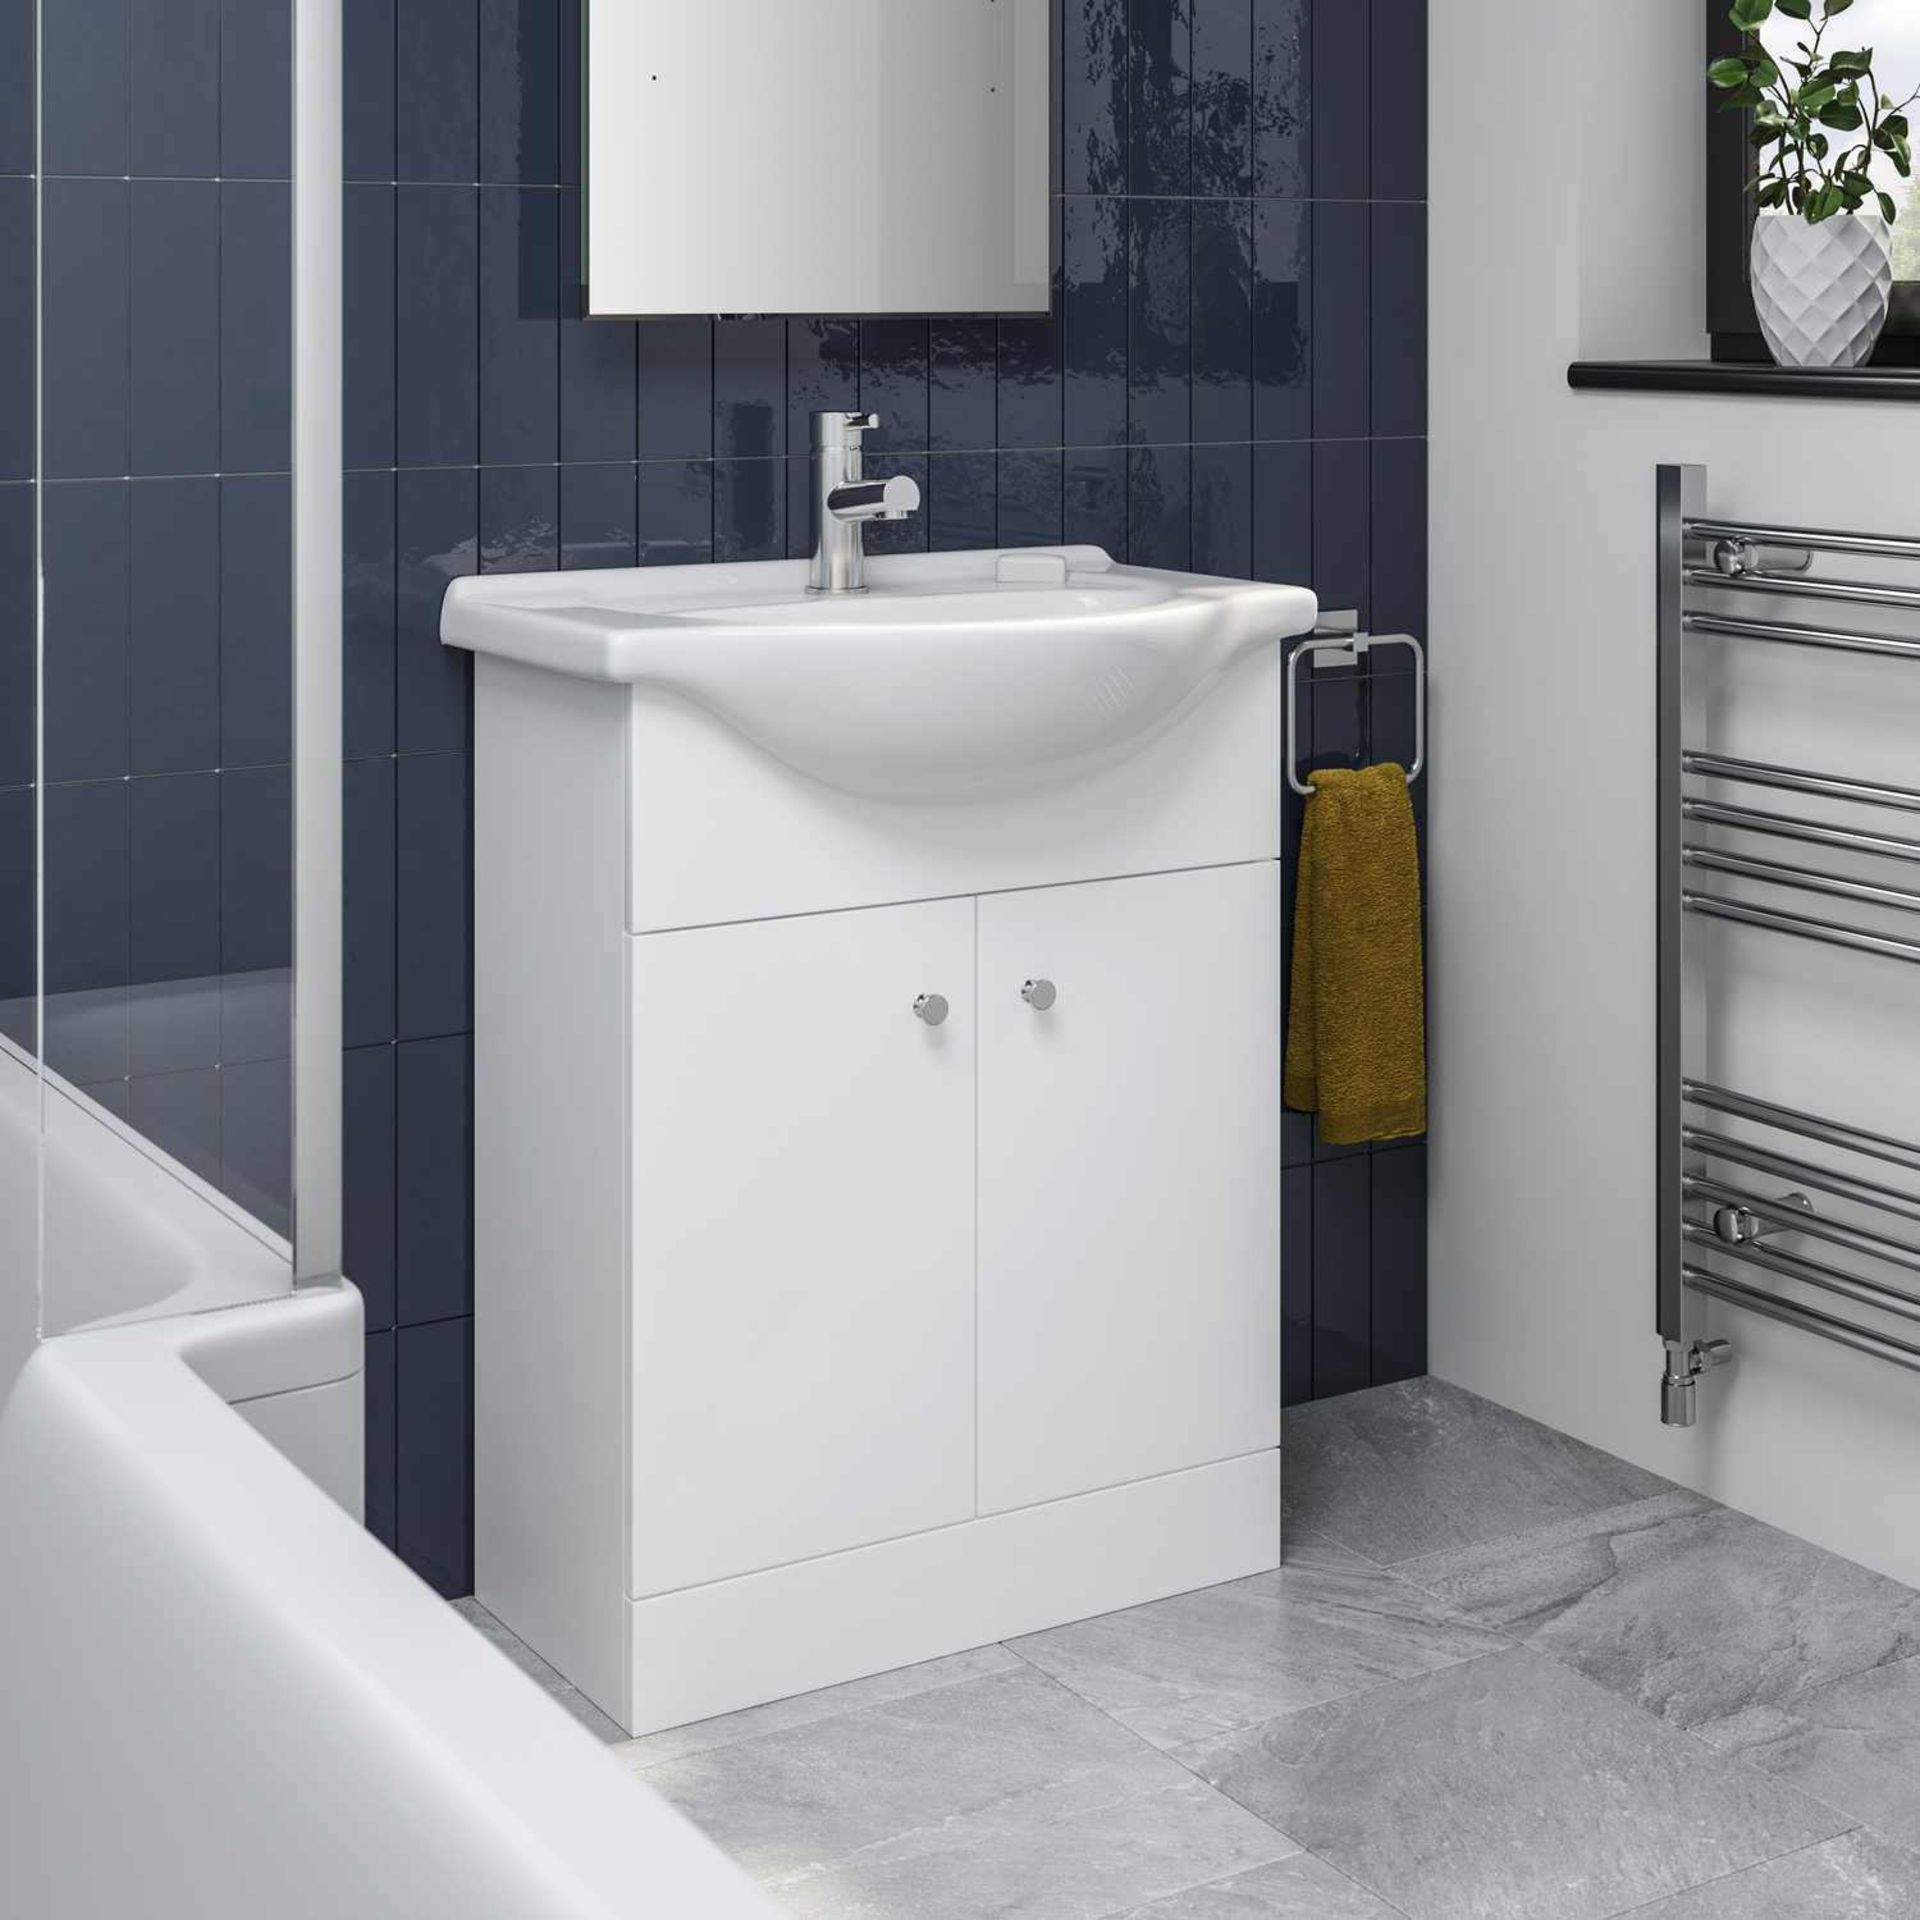 650mm Quartz White Basin Vanity Unit- Floor Standing. RRP £399.99.Comes complete with basin. ... - Image 2 of 2